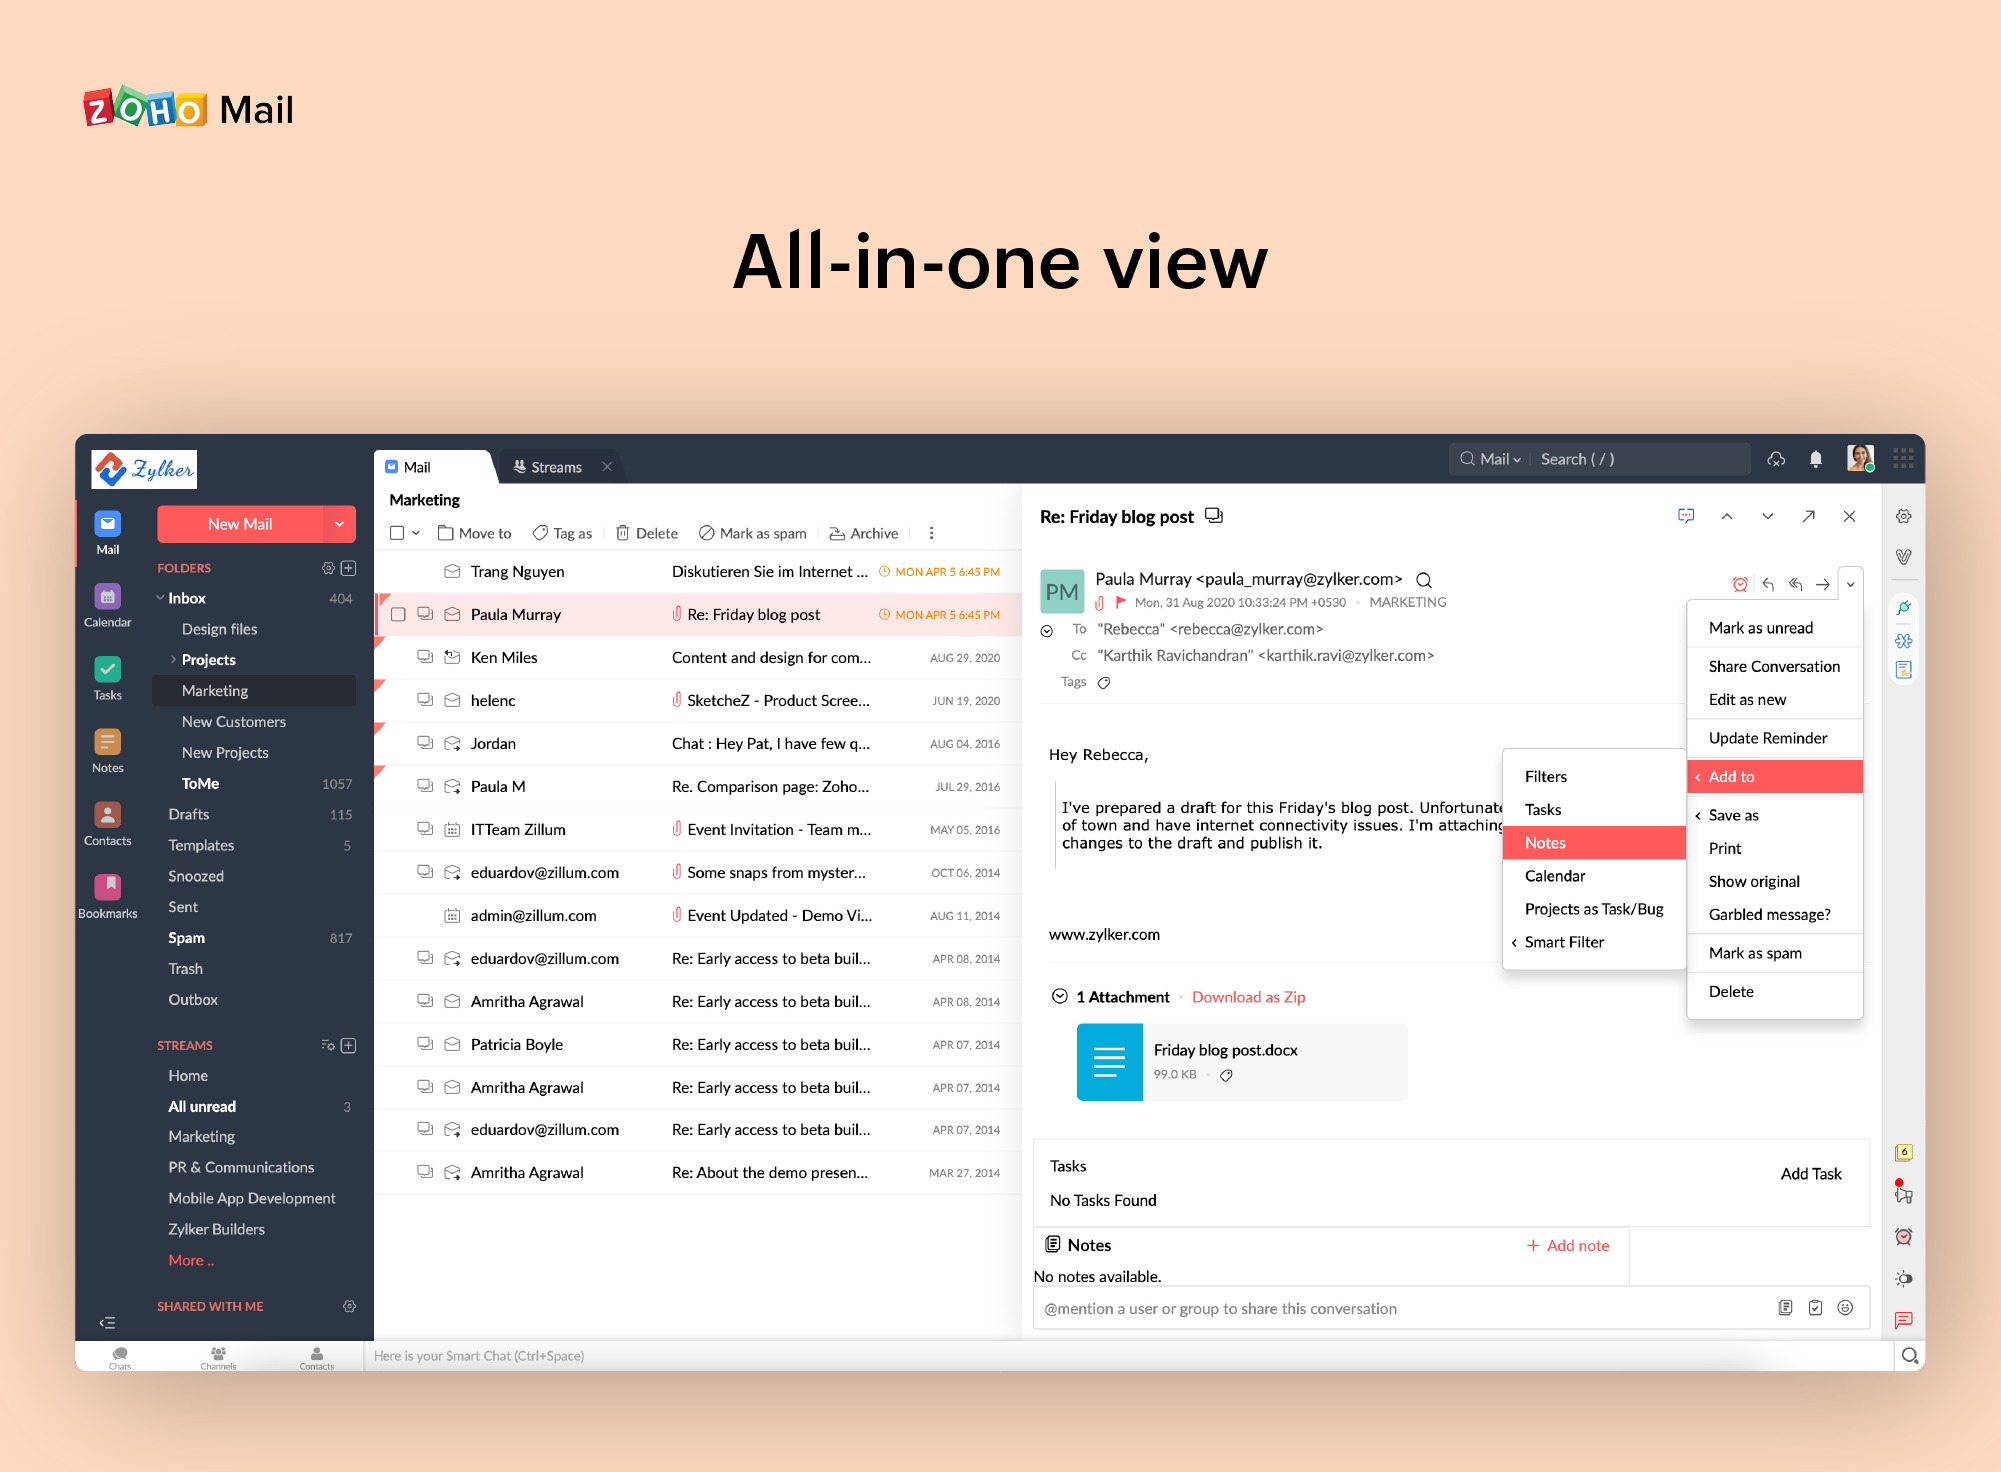 Zoho Mail - All-in-one view